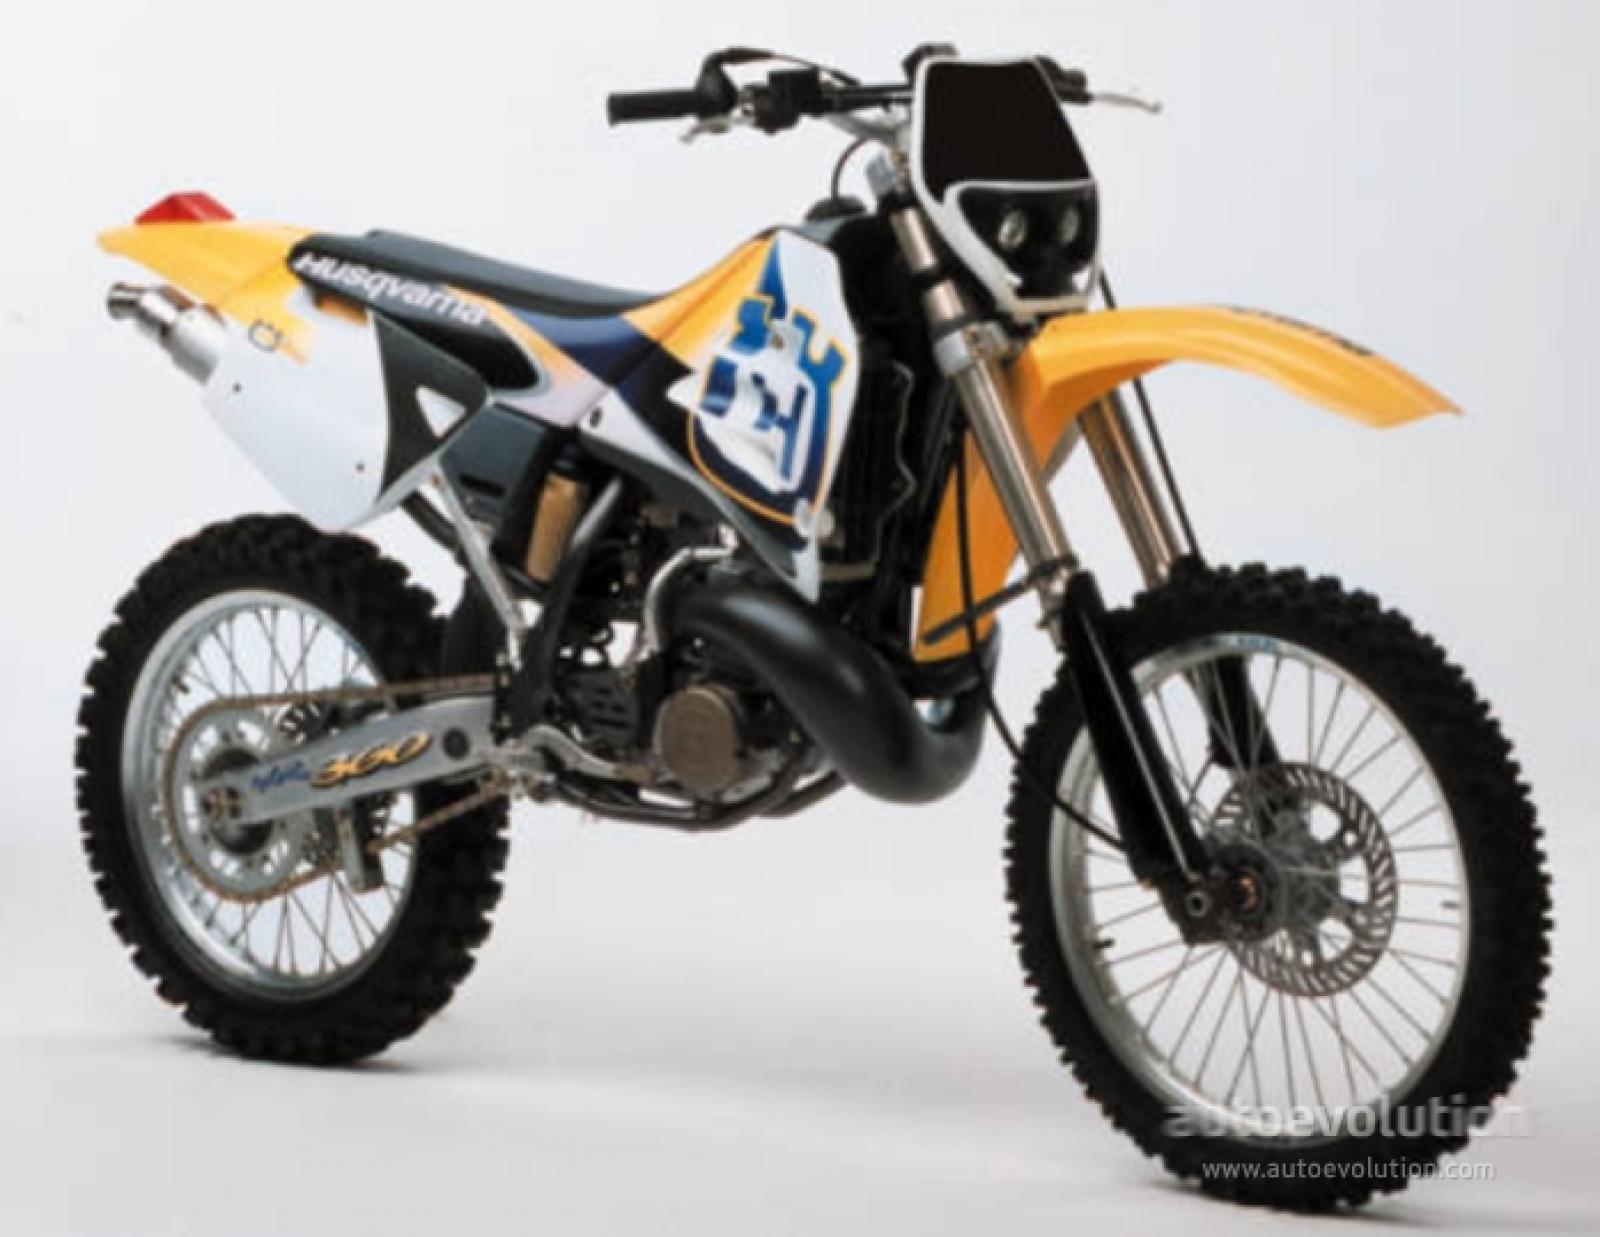 HUSQVARNA WR 360. Technical data of motorcycle. Motorcycle 